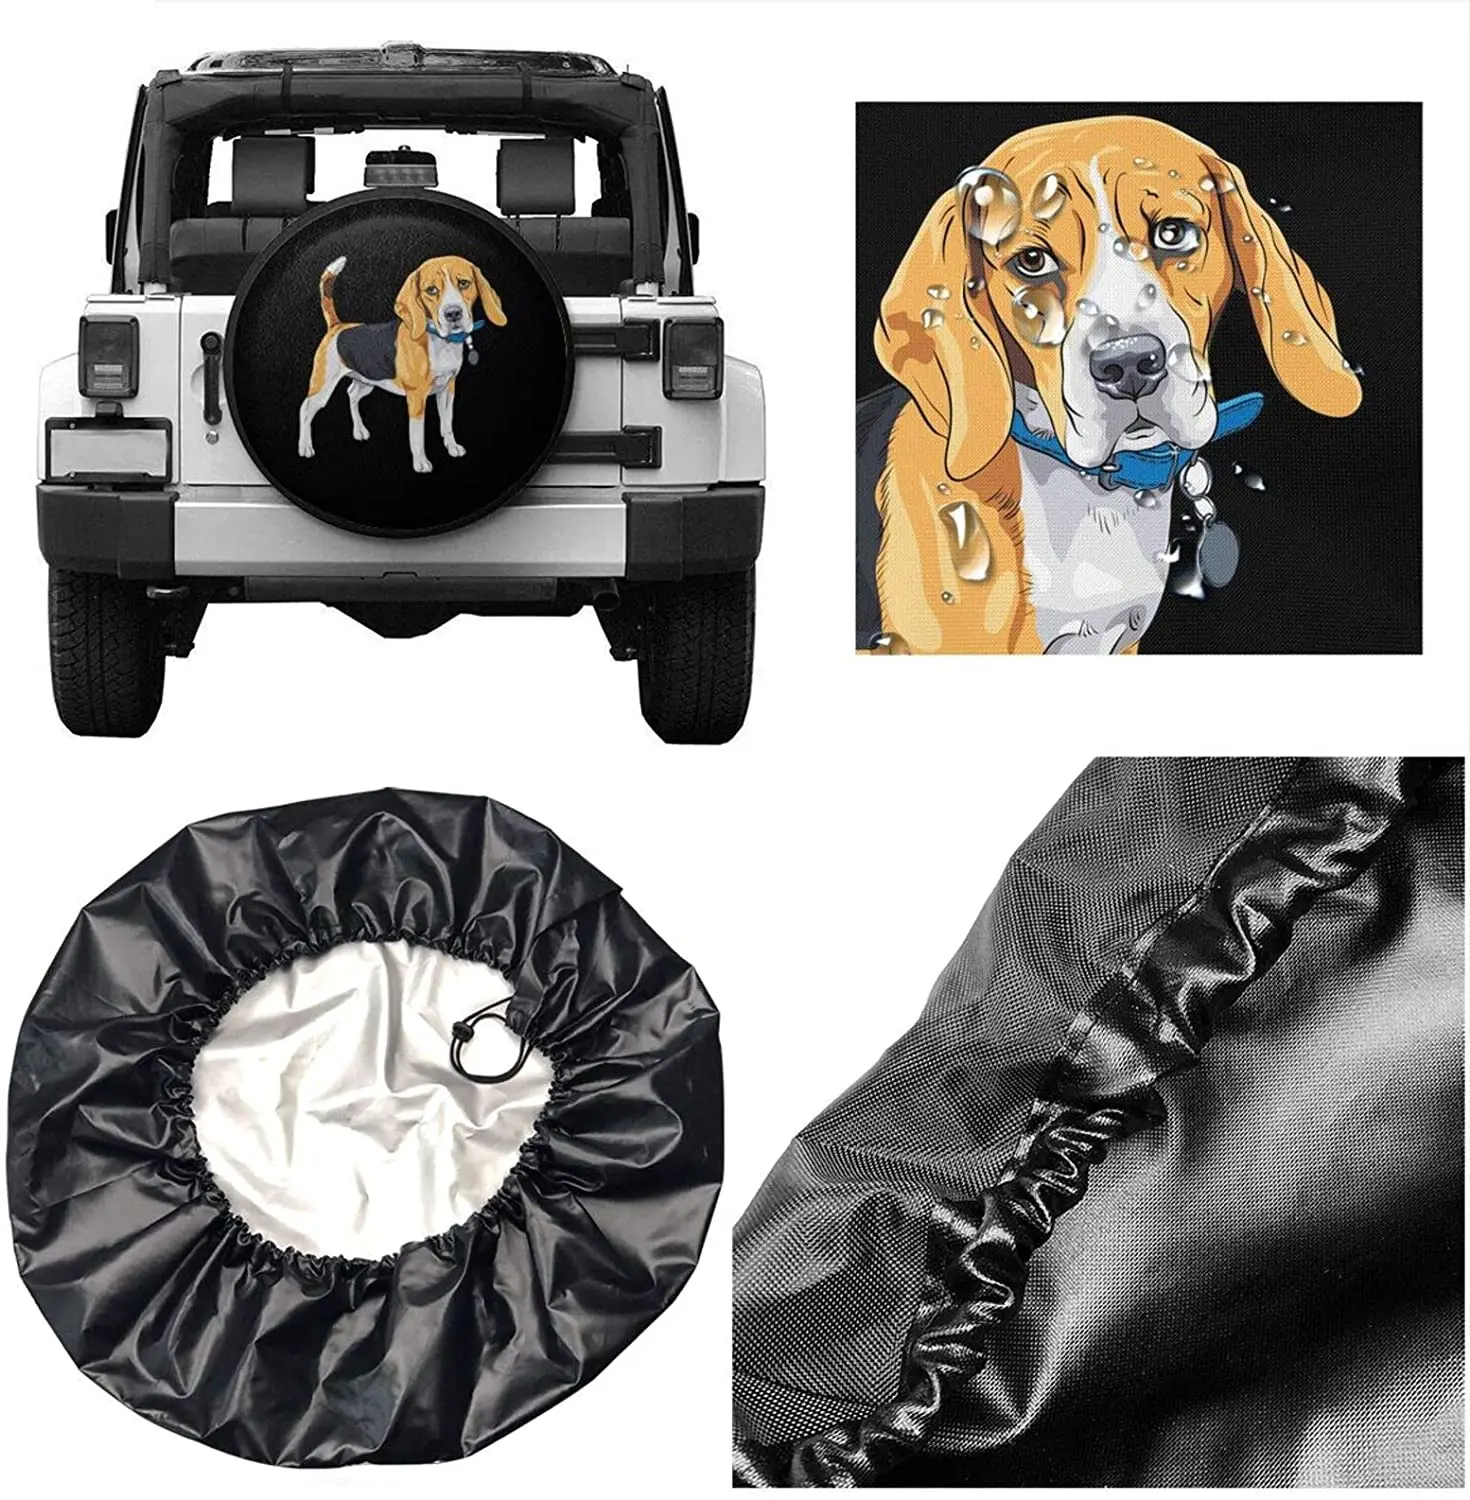 Laboojkay Vintage Goldendoodle Waterproof Uv Sun Protectors Spare Tire Covers Dustproof Wheel Covers for Jeep,Trailer,Rv,SUV,Truck,Wagon,Cars,Police Car and Many Vehicles 14-17 Inches 